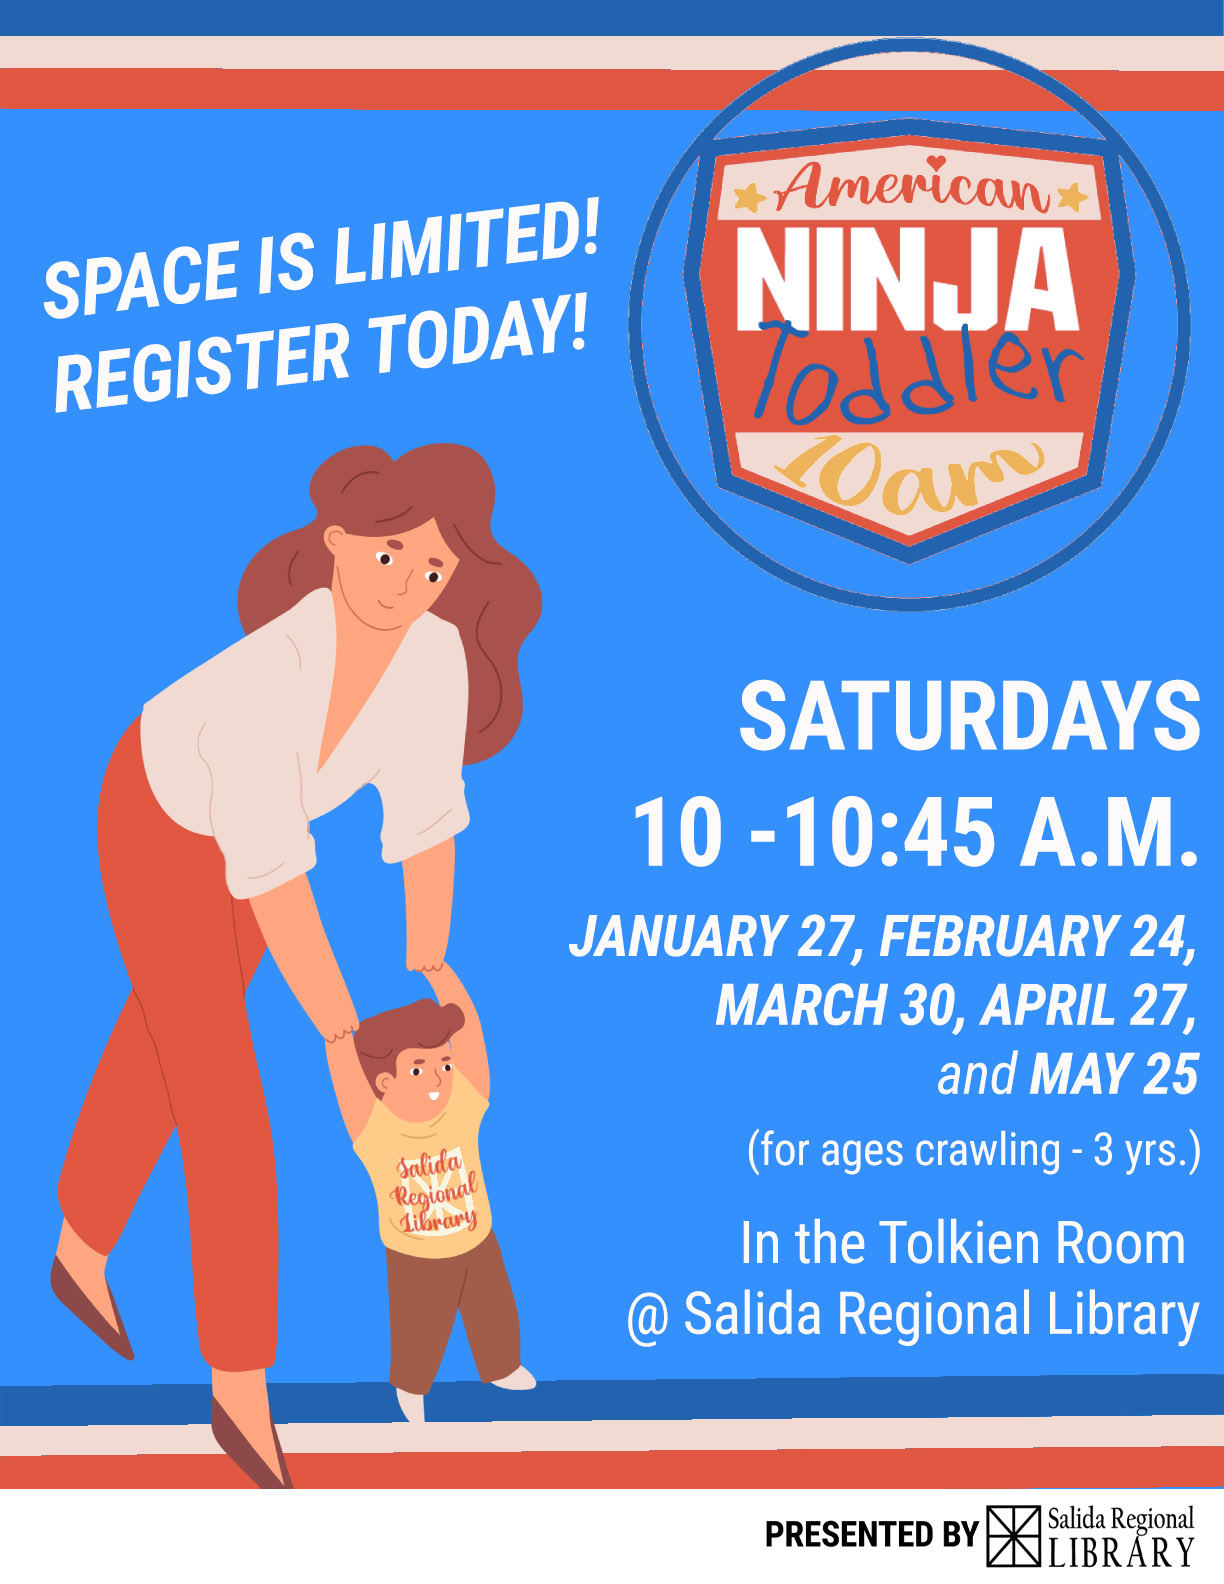 American Ninja Toddler Space is Limited Register Today! Saturdays 1- to 1-:45 a.m. January 27, February 24, March 2=30, April 27, and May 25. for ages crawling to 3 years. In the Tolkien Room at the Salida Regional Library.